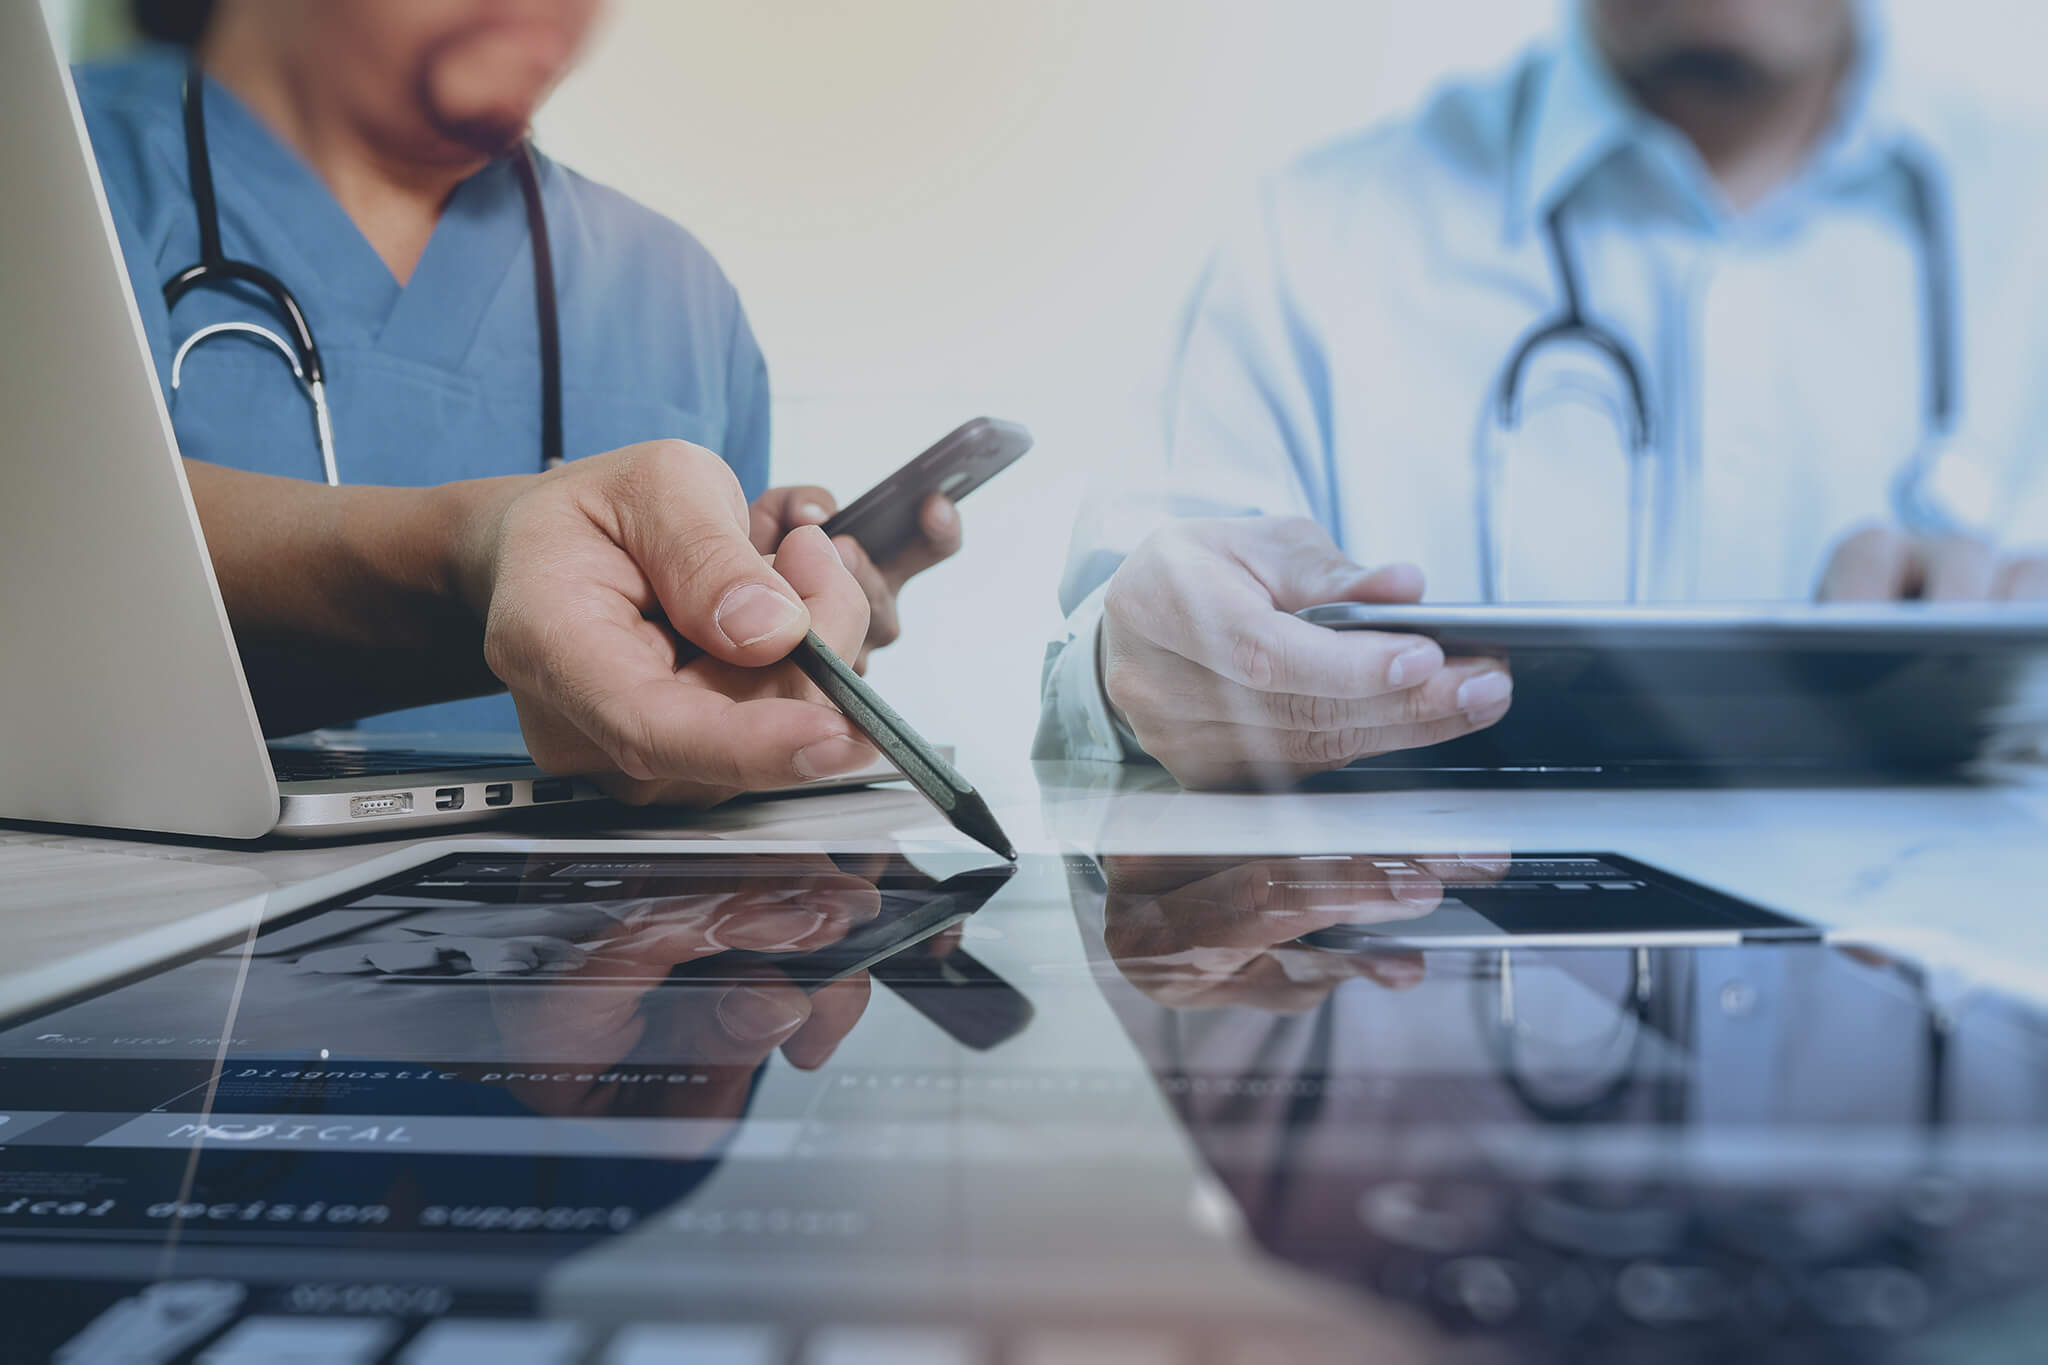 Medical Technologies Are Changing Operational Practices in Hospitals